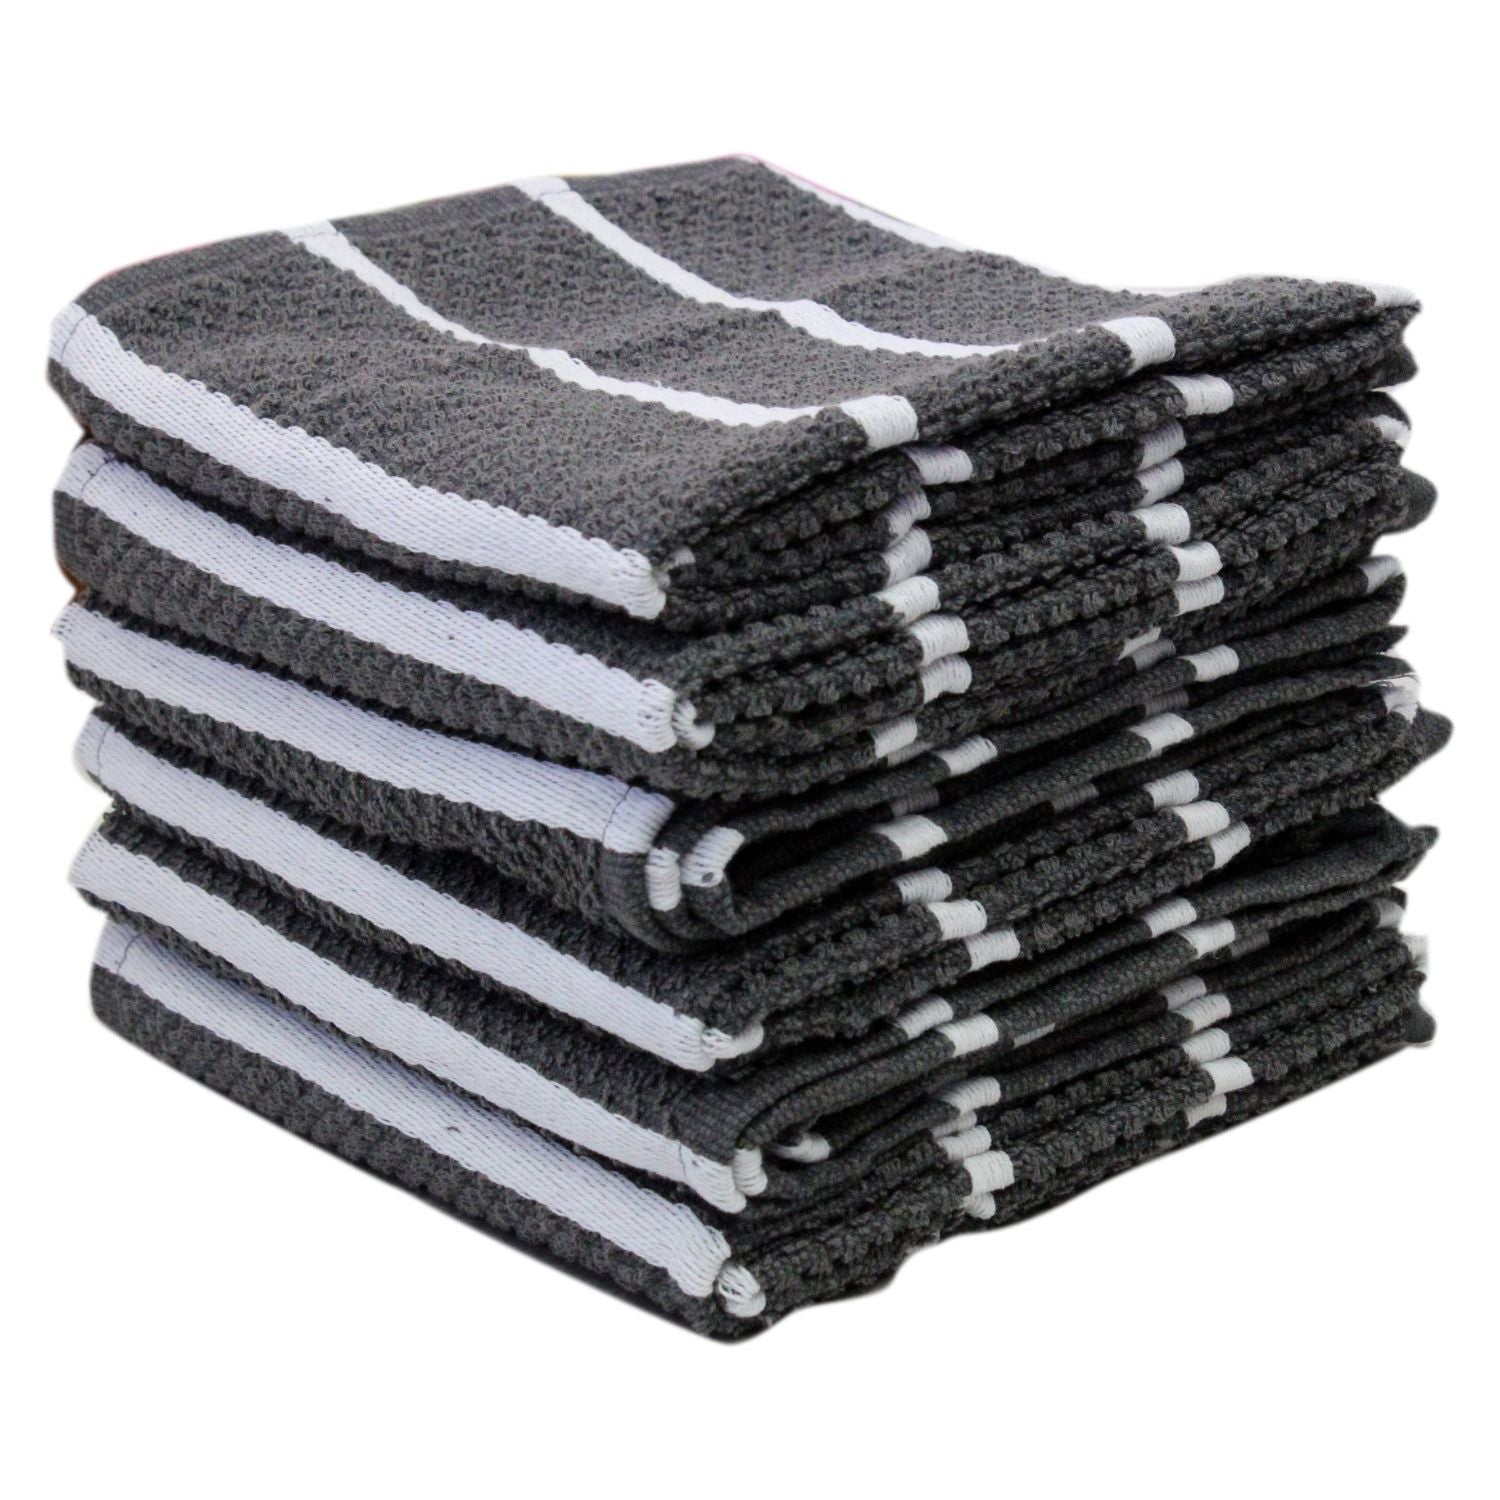 Lushomes Kitchen Cleaning Cloth, Terry Cotton Dish Machine Washable Towels for Home Use, 6 Pcs Grey Stripes Hand Towel, Pack of 6 Towel, 18x26 Inches, 360 GSM (45x65 Cms, Set of 6,  )